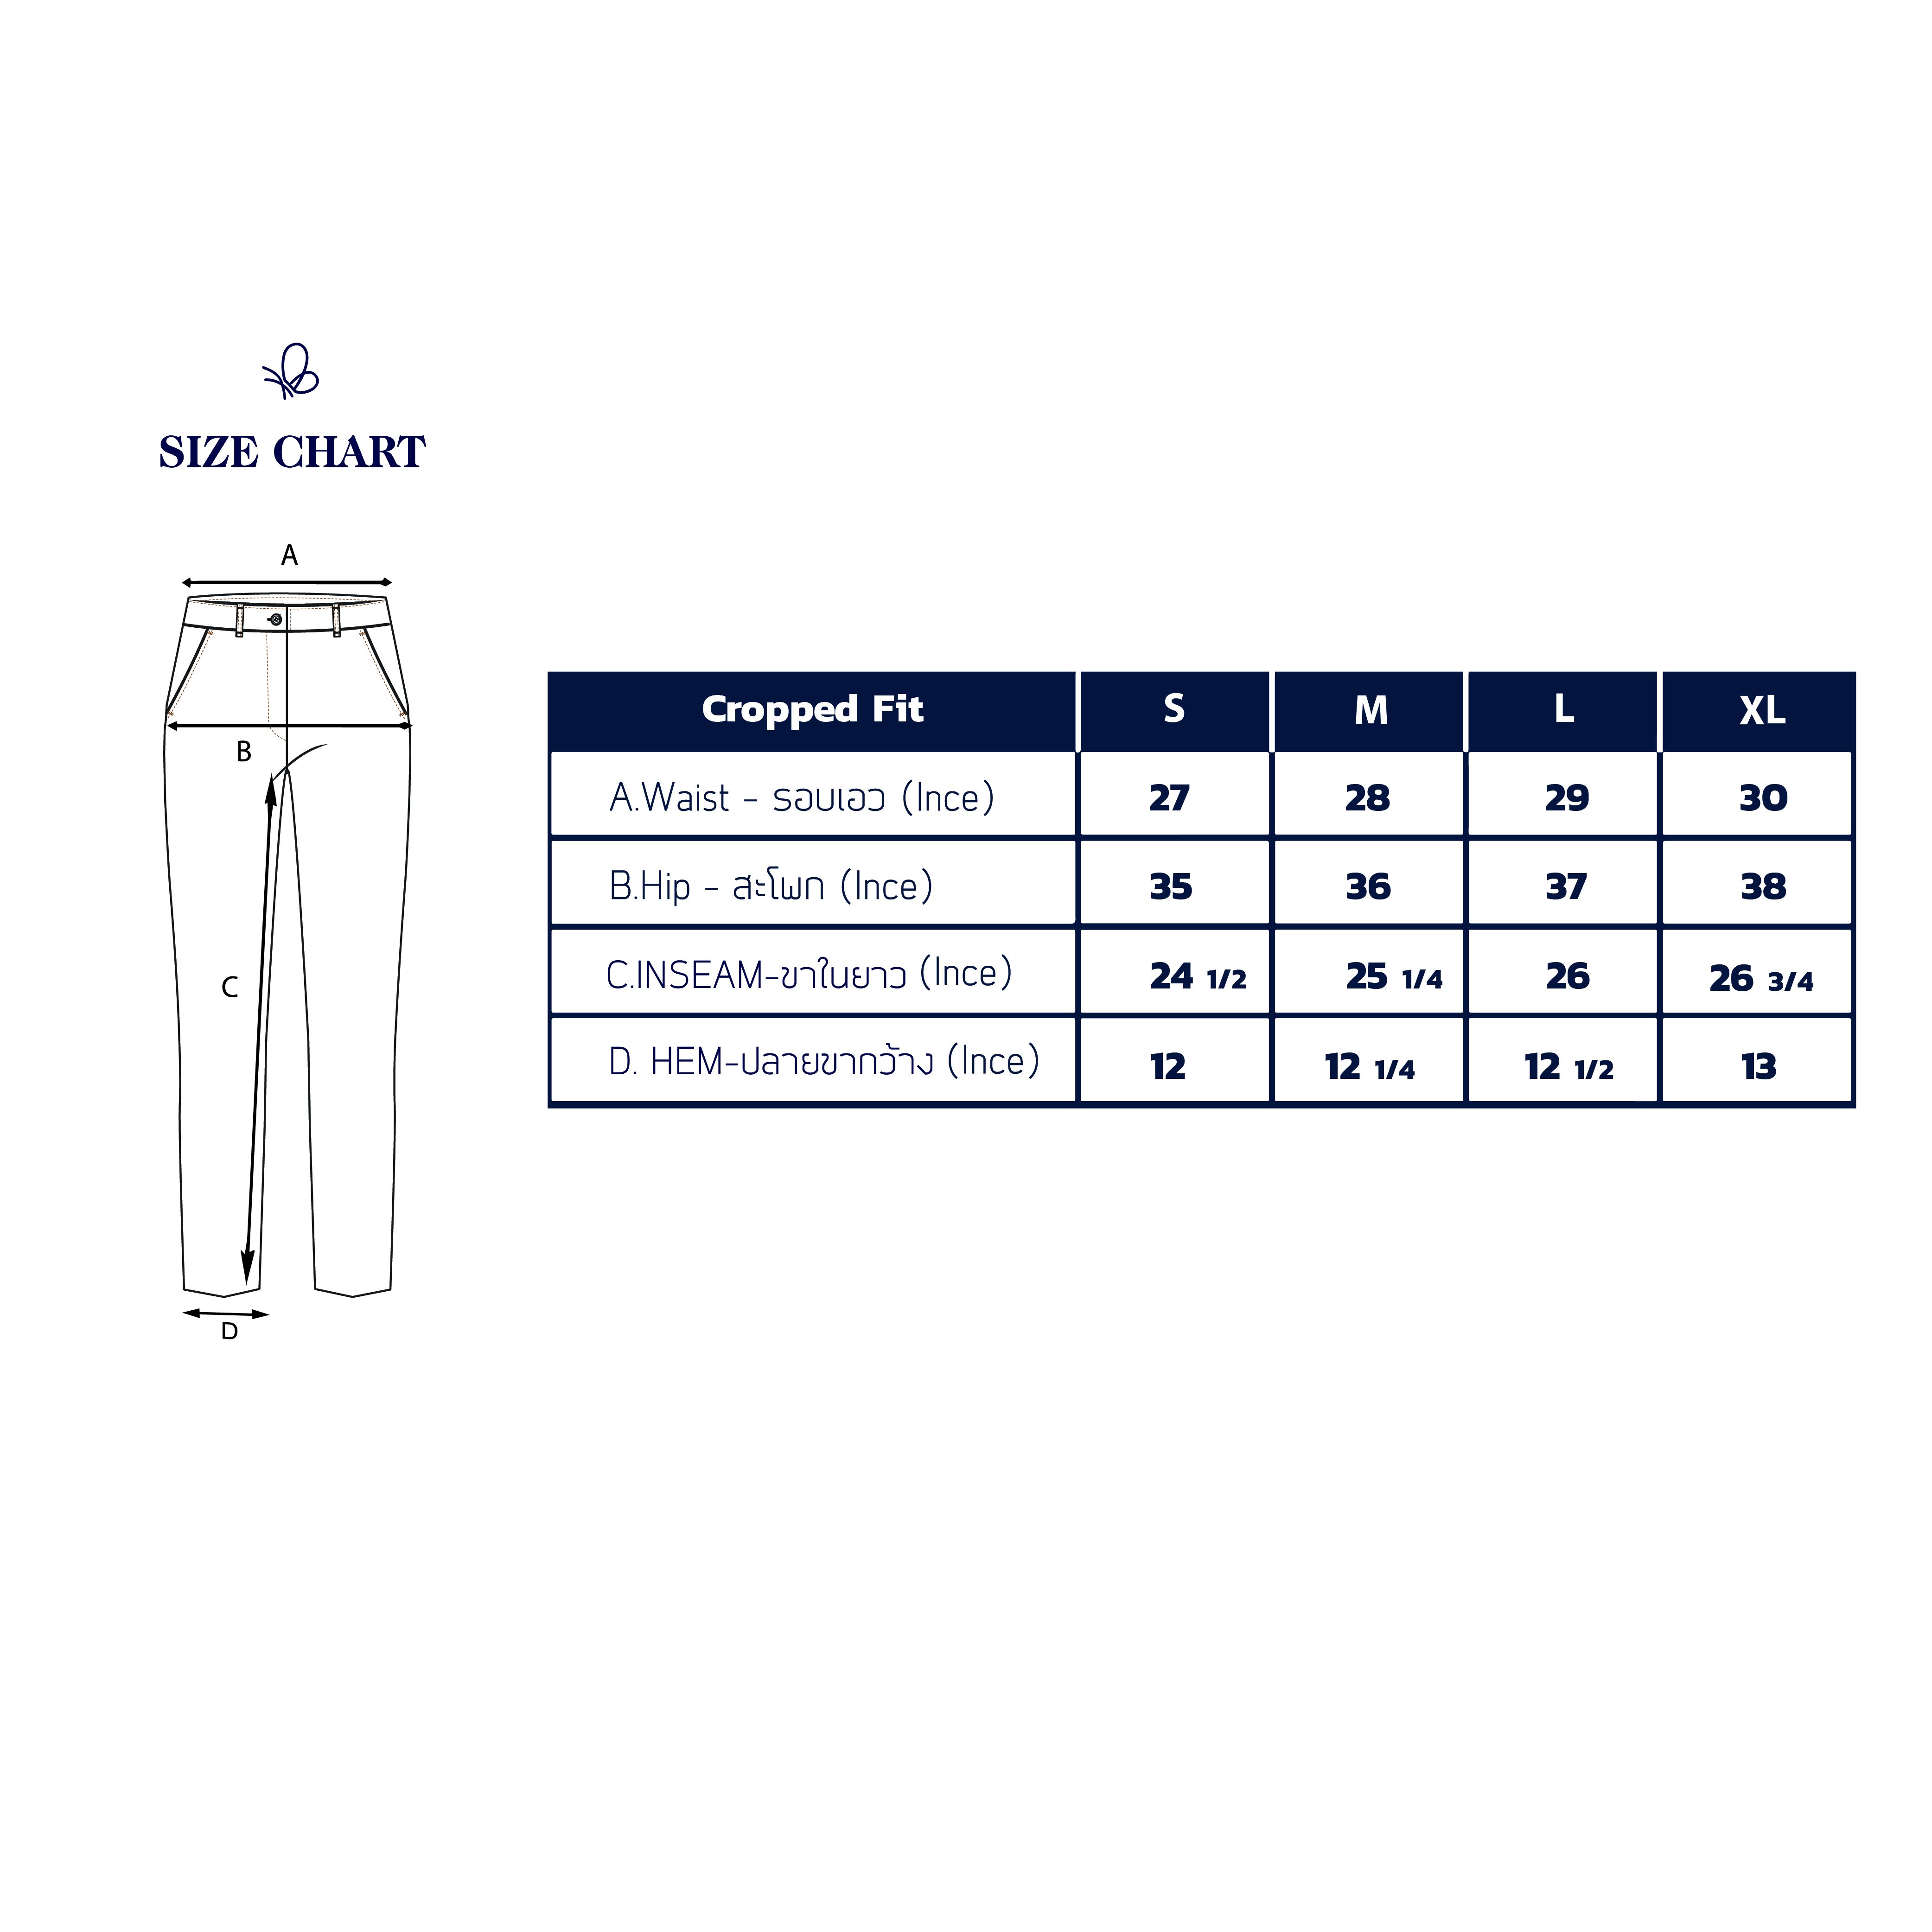 SIZE-Cropped_Fit-new_3